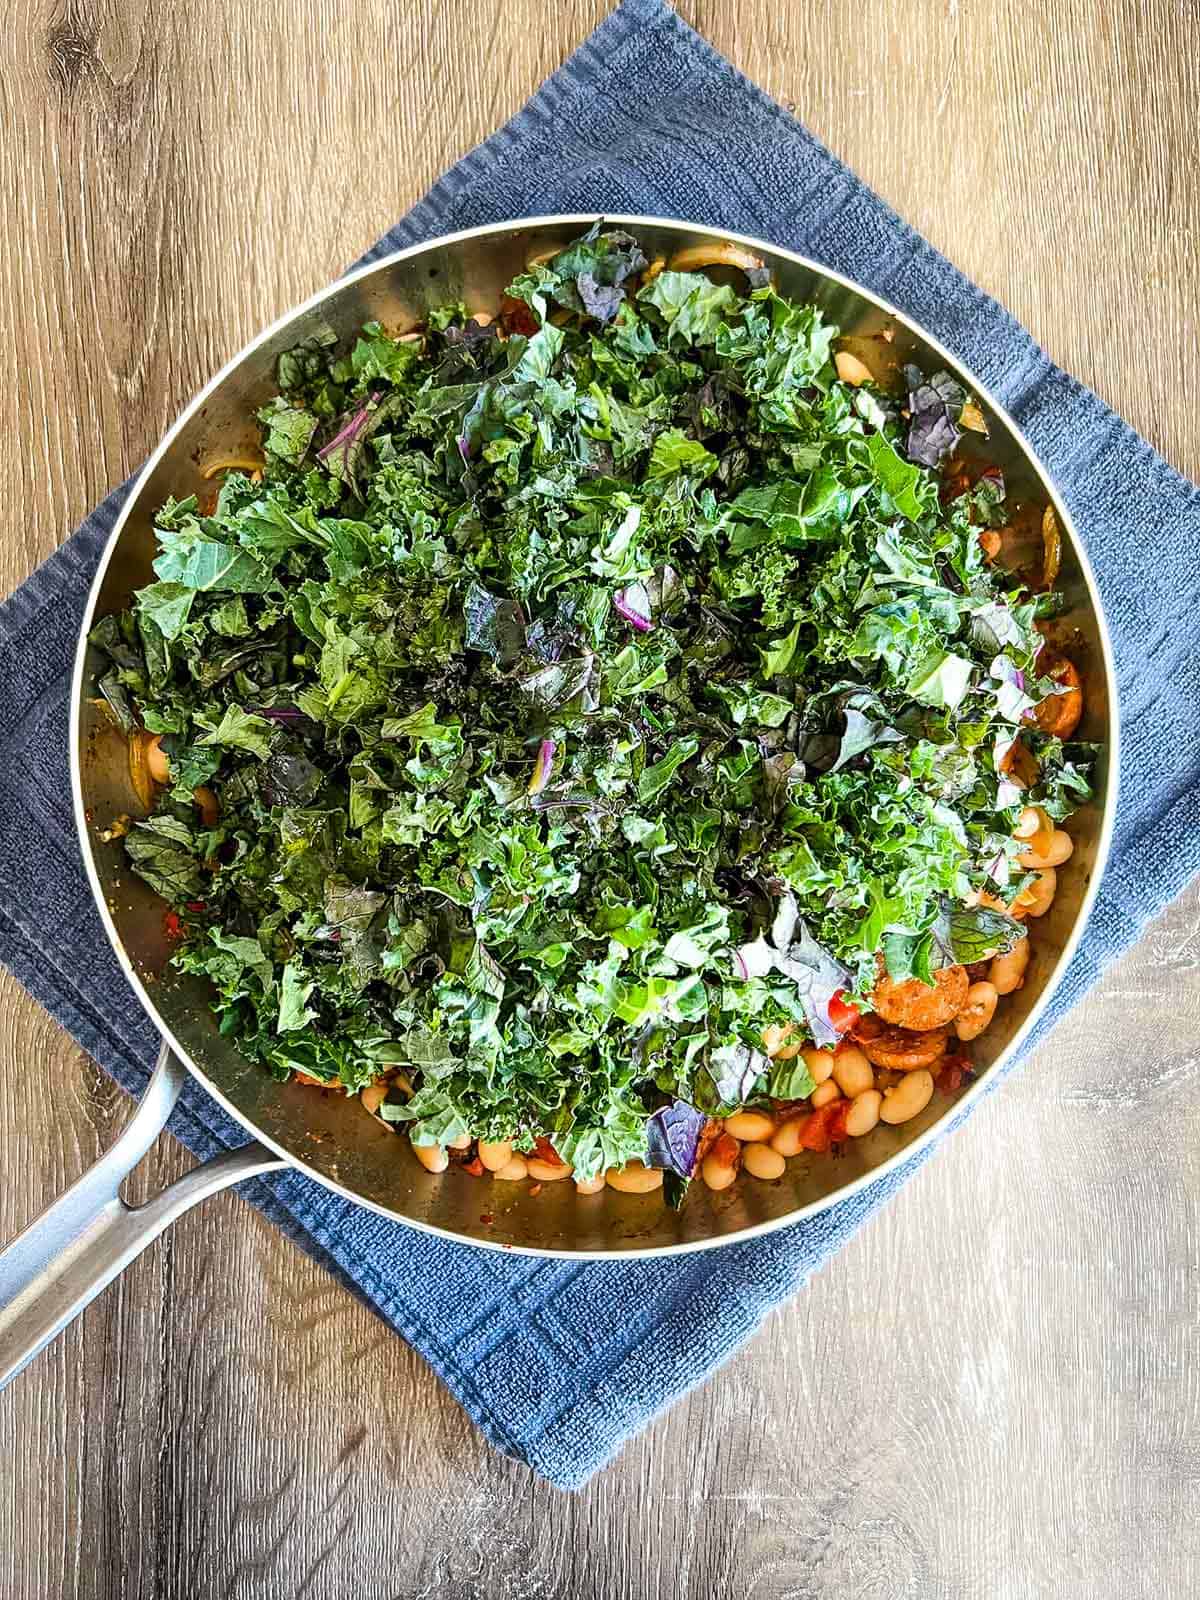 Kale is added on top.